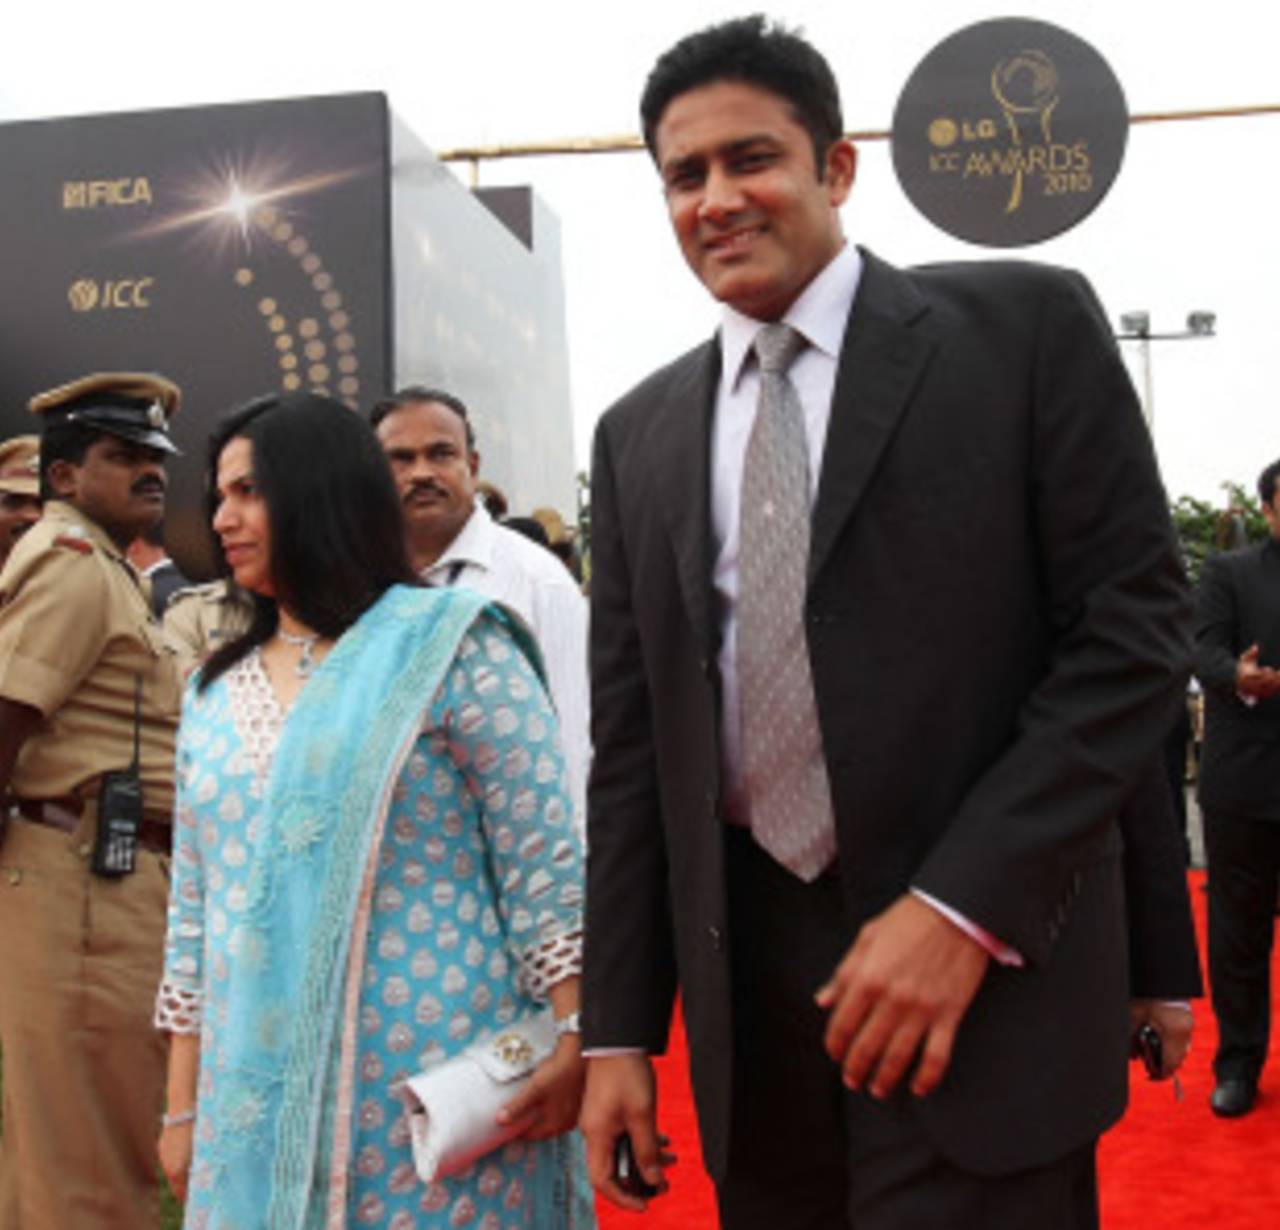 Anil Kumble and his wife arrive for the 2010 ICC Awards in Bangalore, October 6, 2010